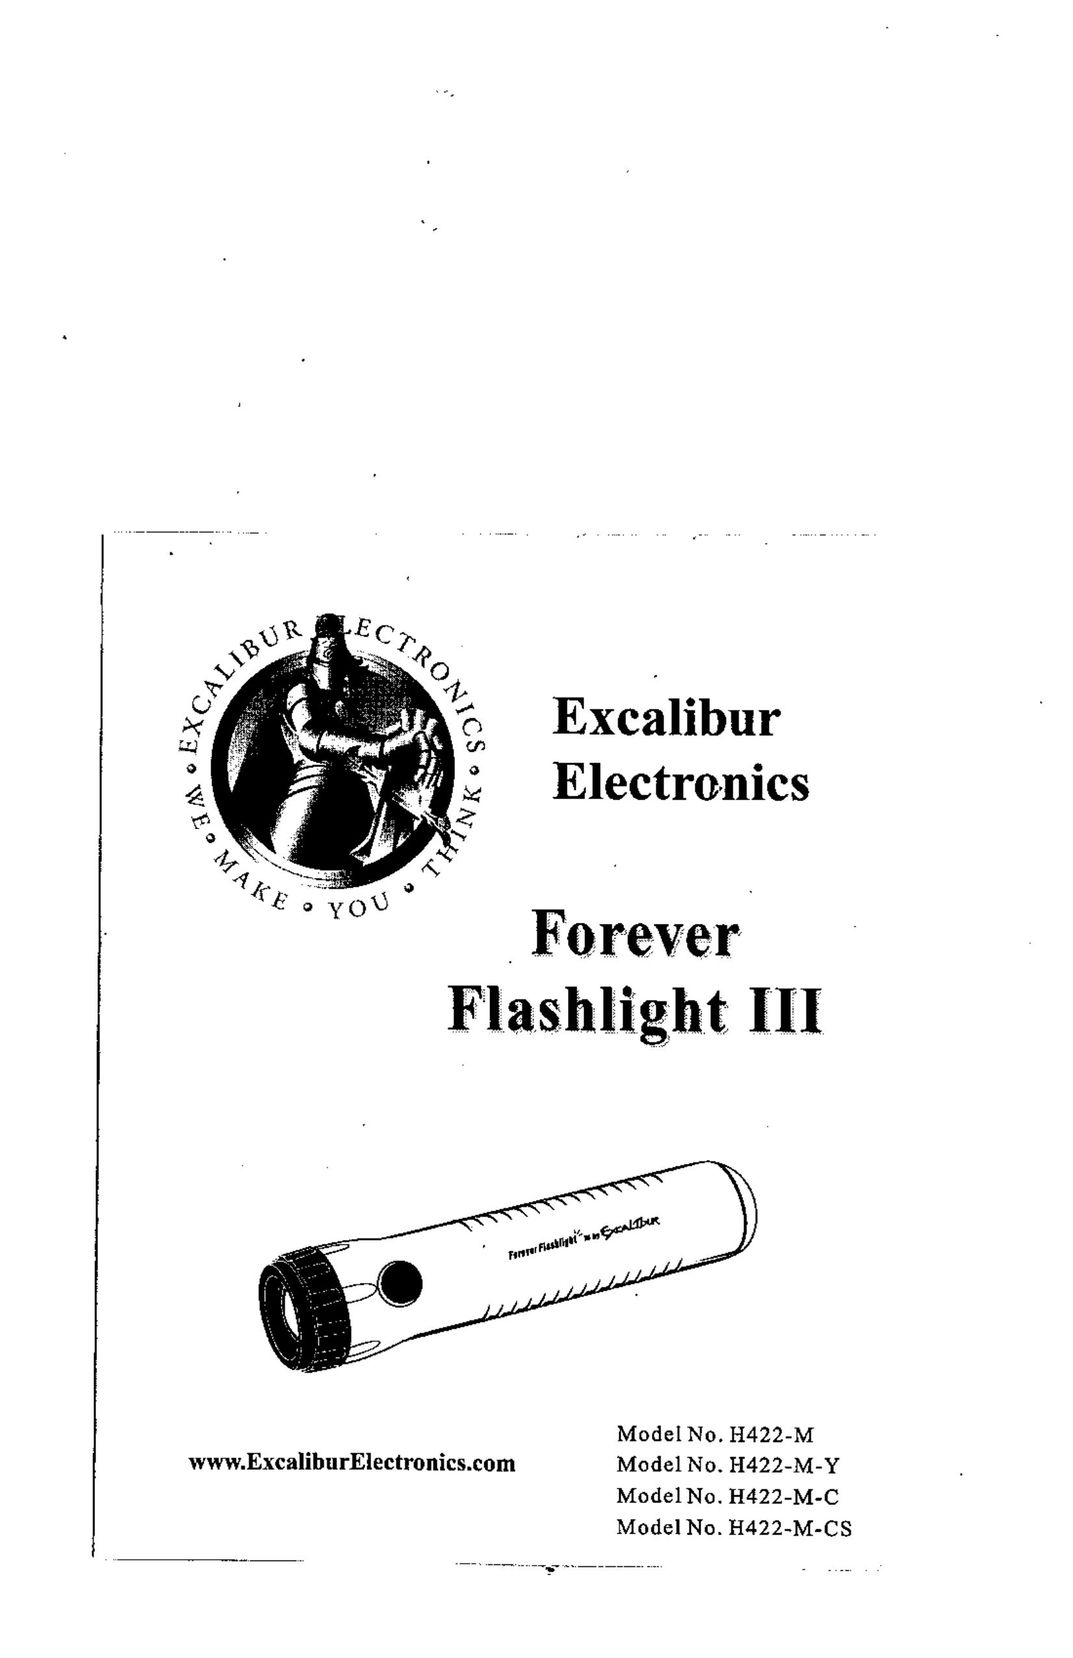 Excalibur electronic H422-M-C Home Safety Product User Manual